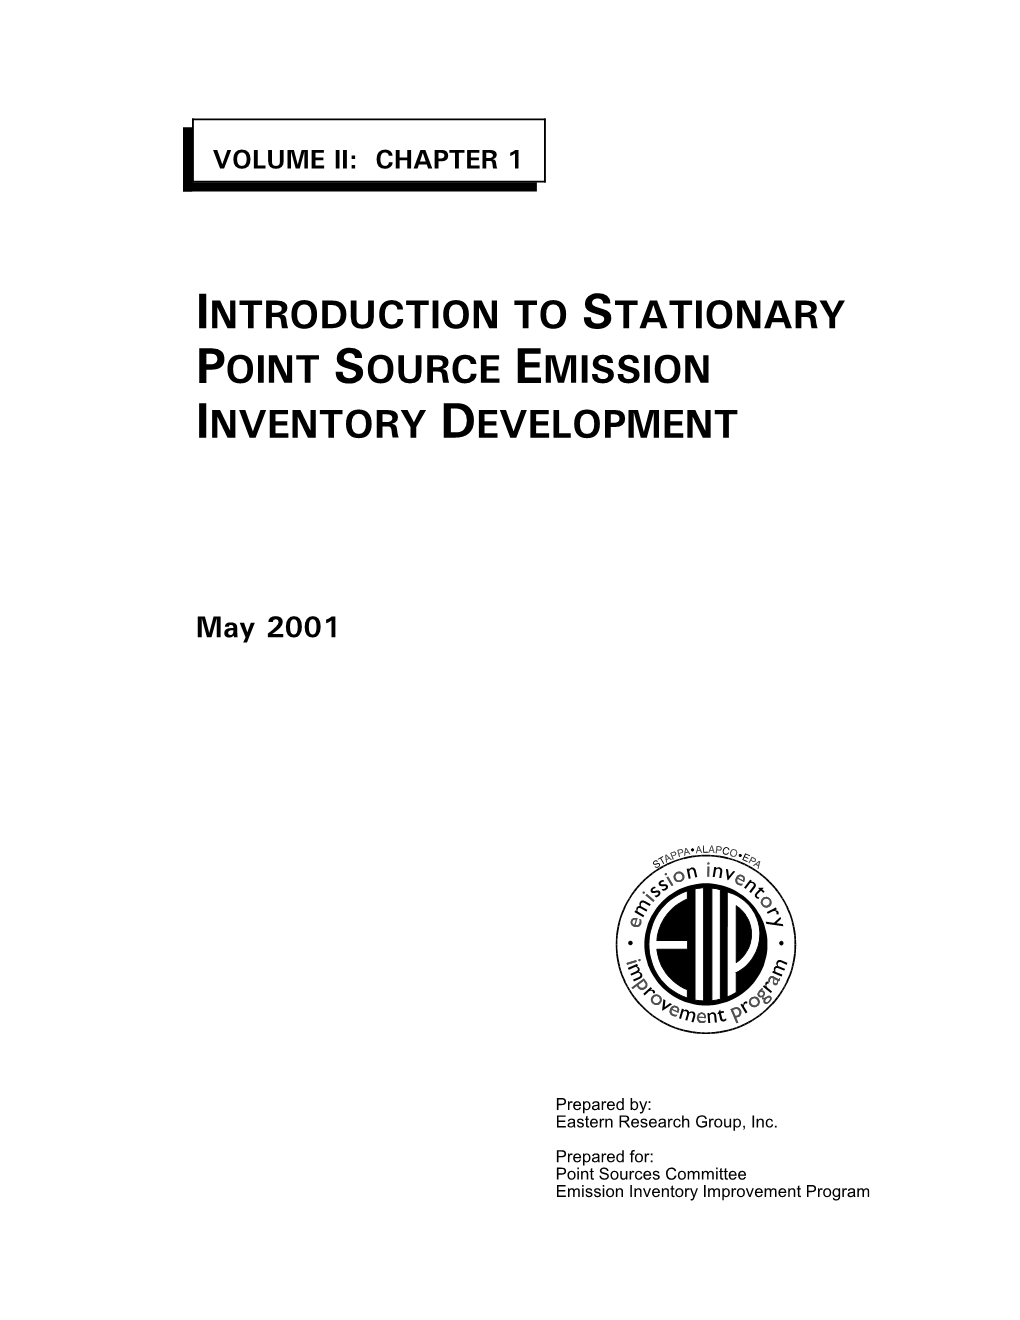 Introduction to Stationary Point Source Emission Inventory Development